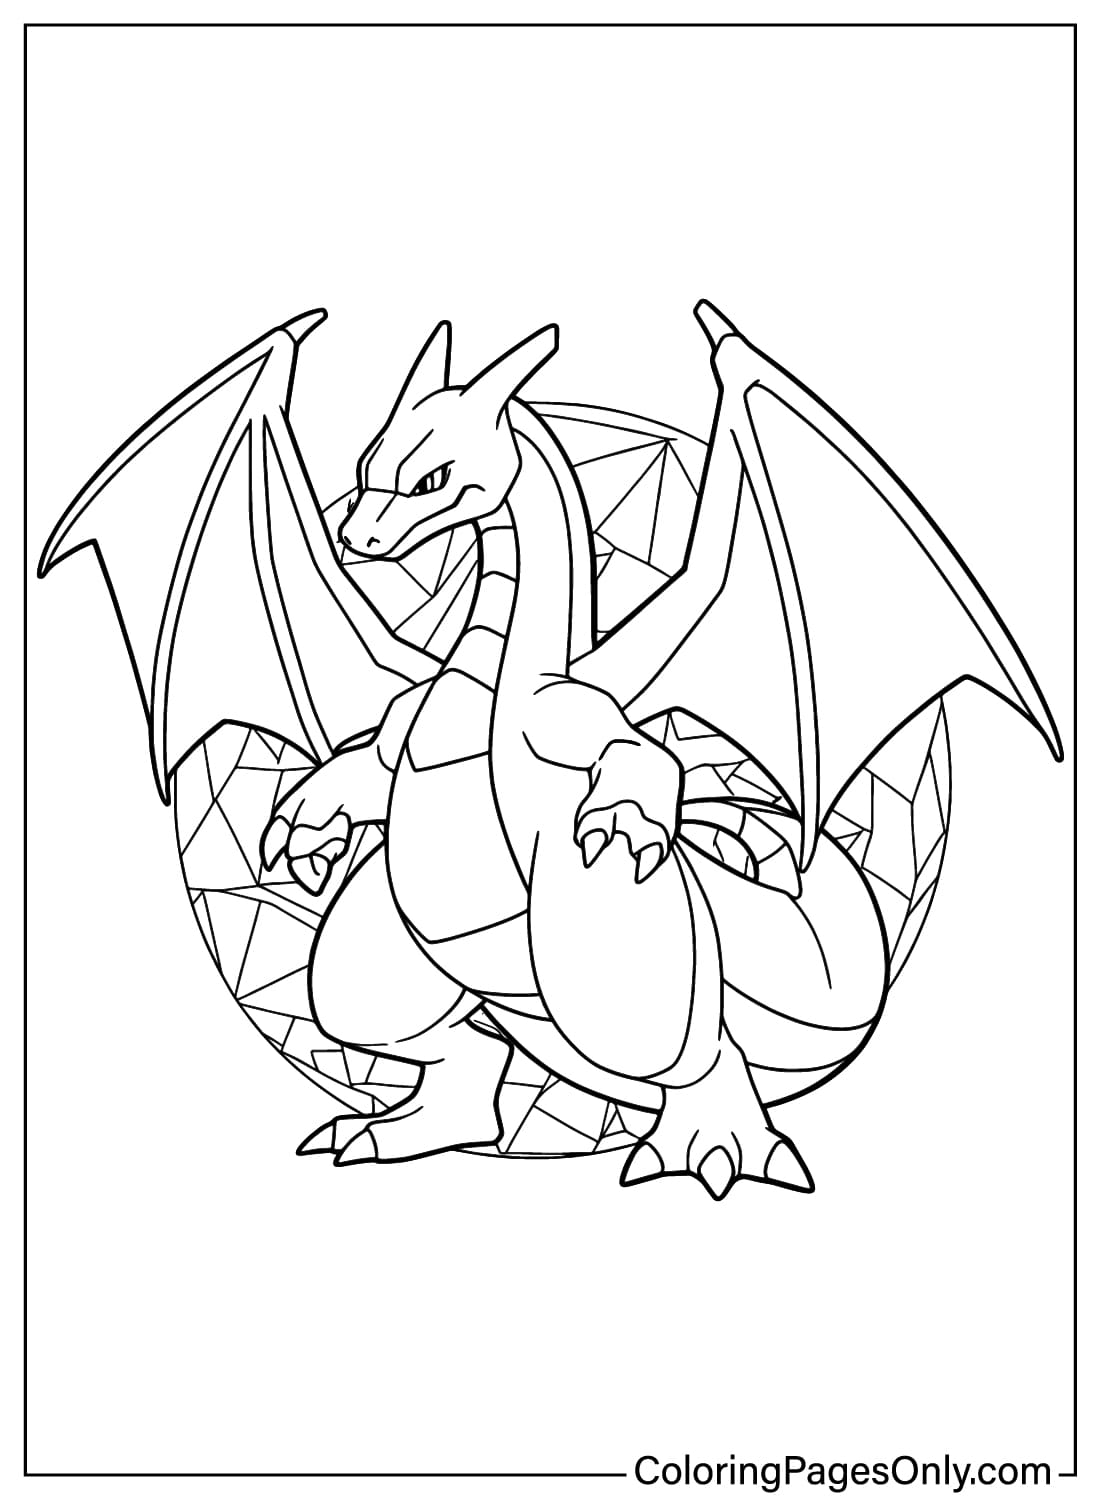 Free Printable Charizard Coloring Page